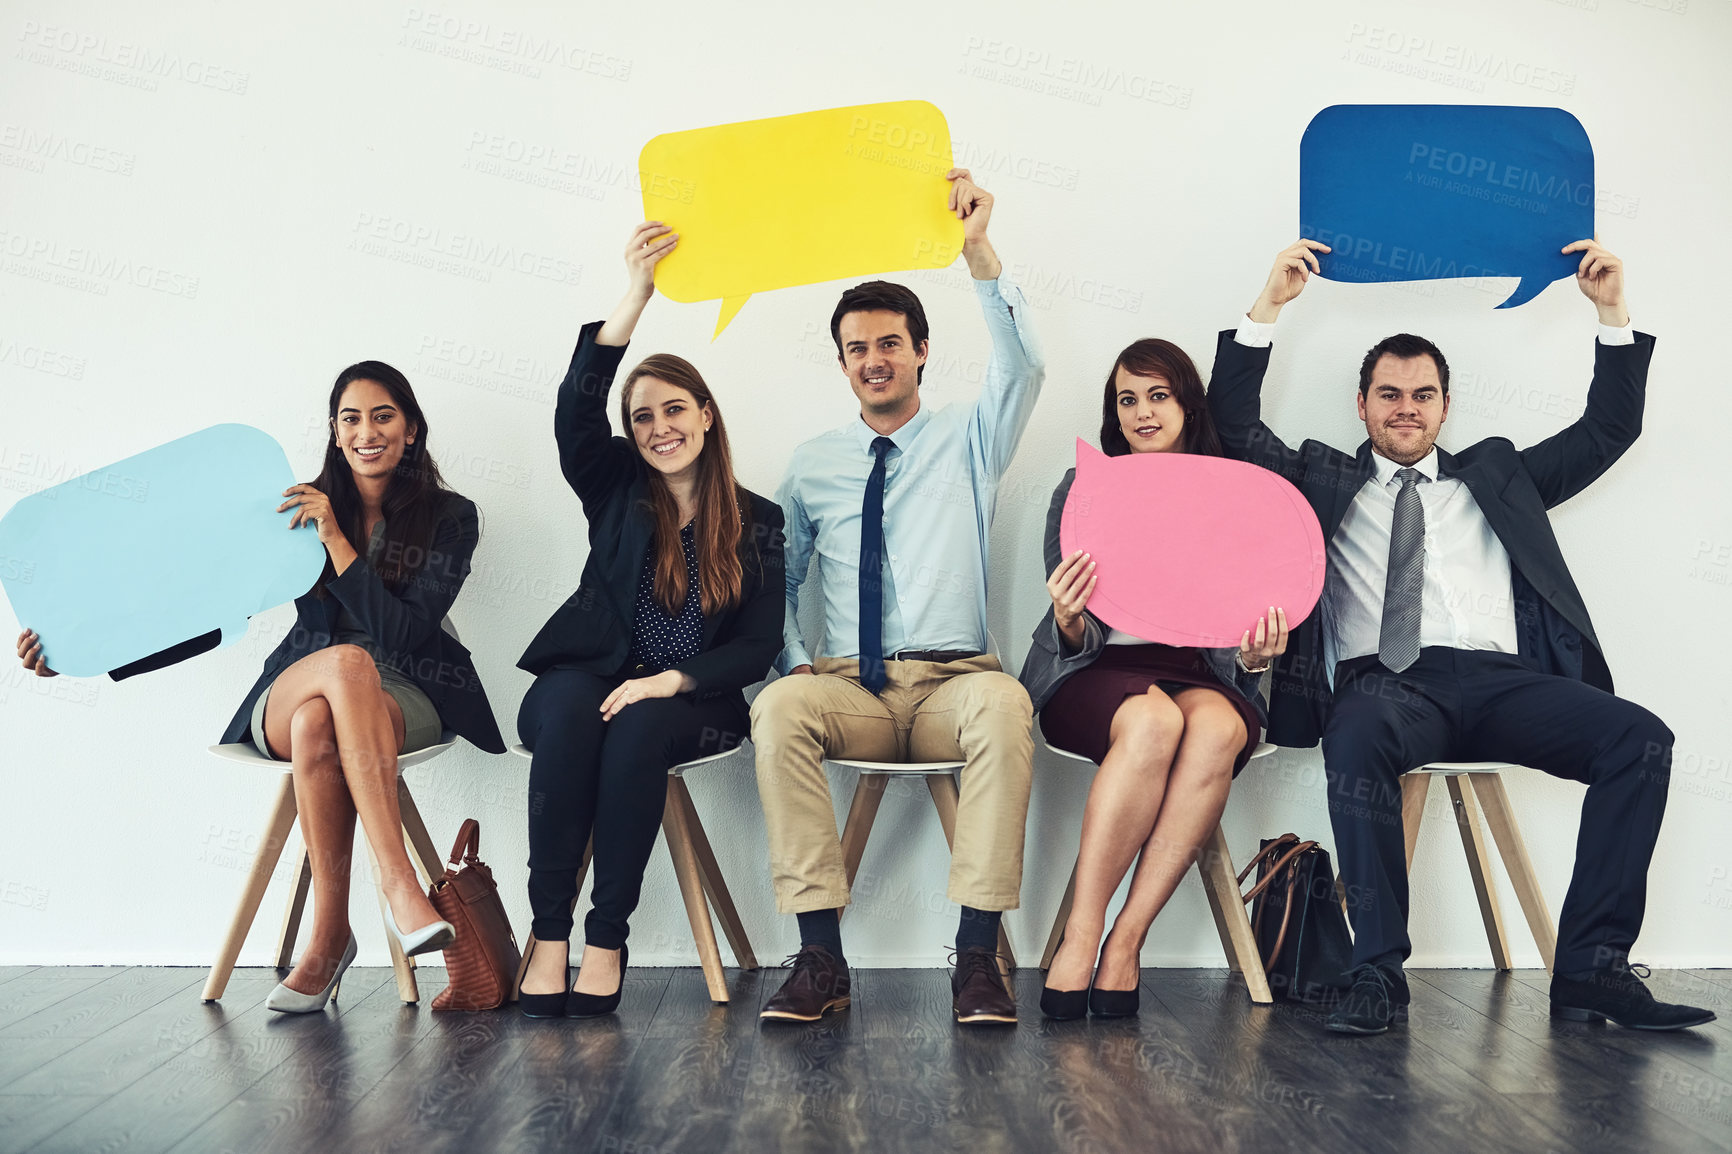 Buy stock photo Studio shot of a group of businesspeople holding colorful speech bubbles while waiting in line